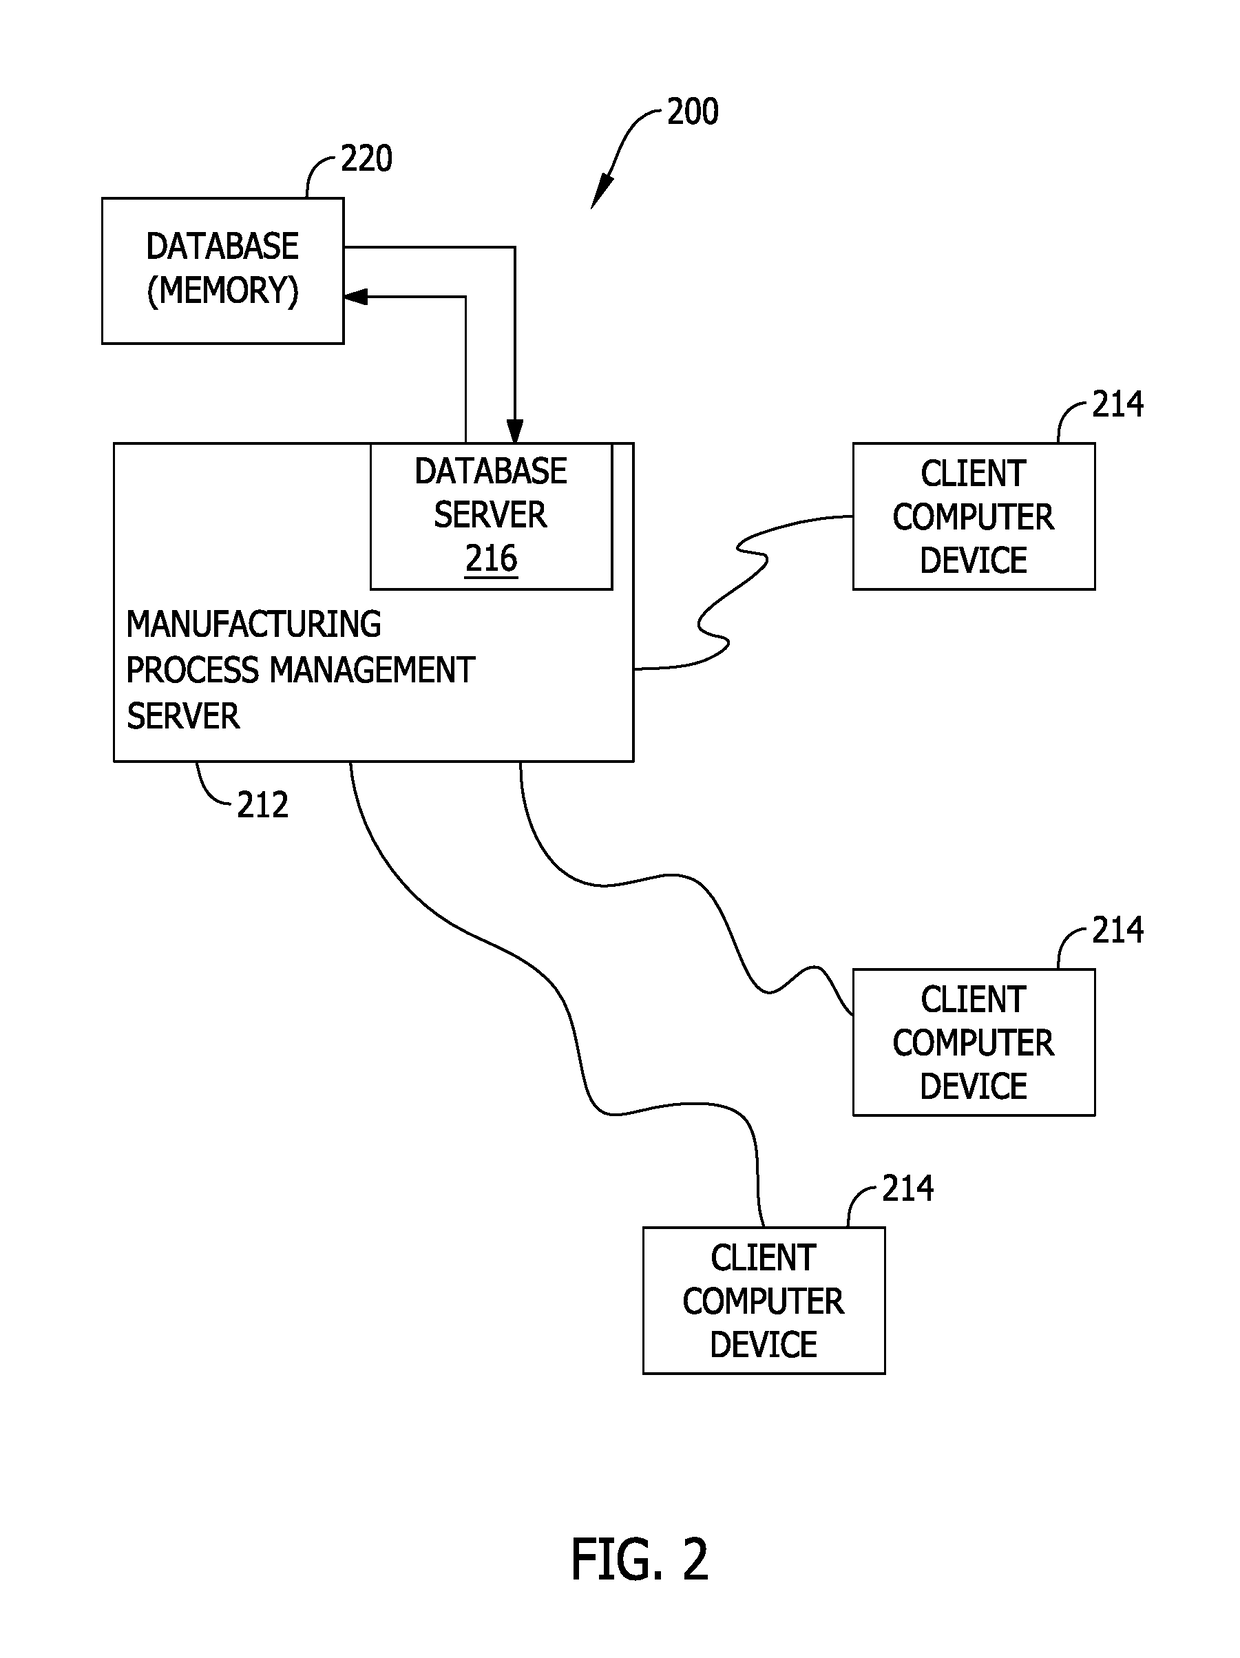 System and methods for managing changes to a product in a manufacturing environment including a minor model relational design